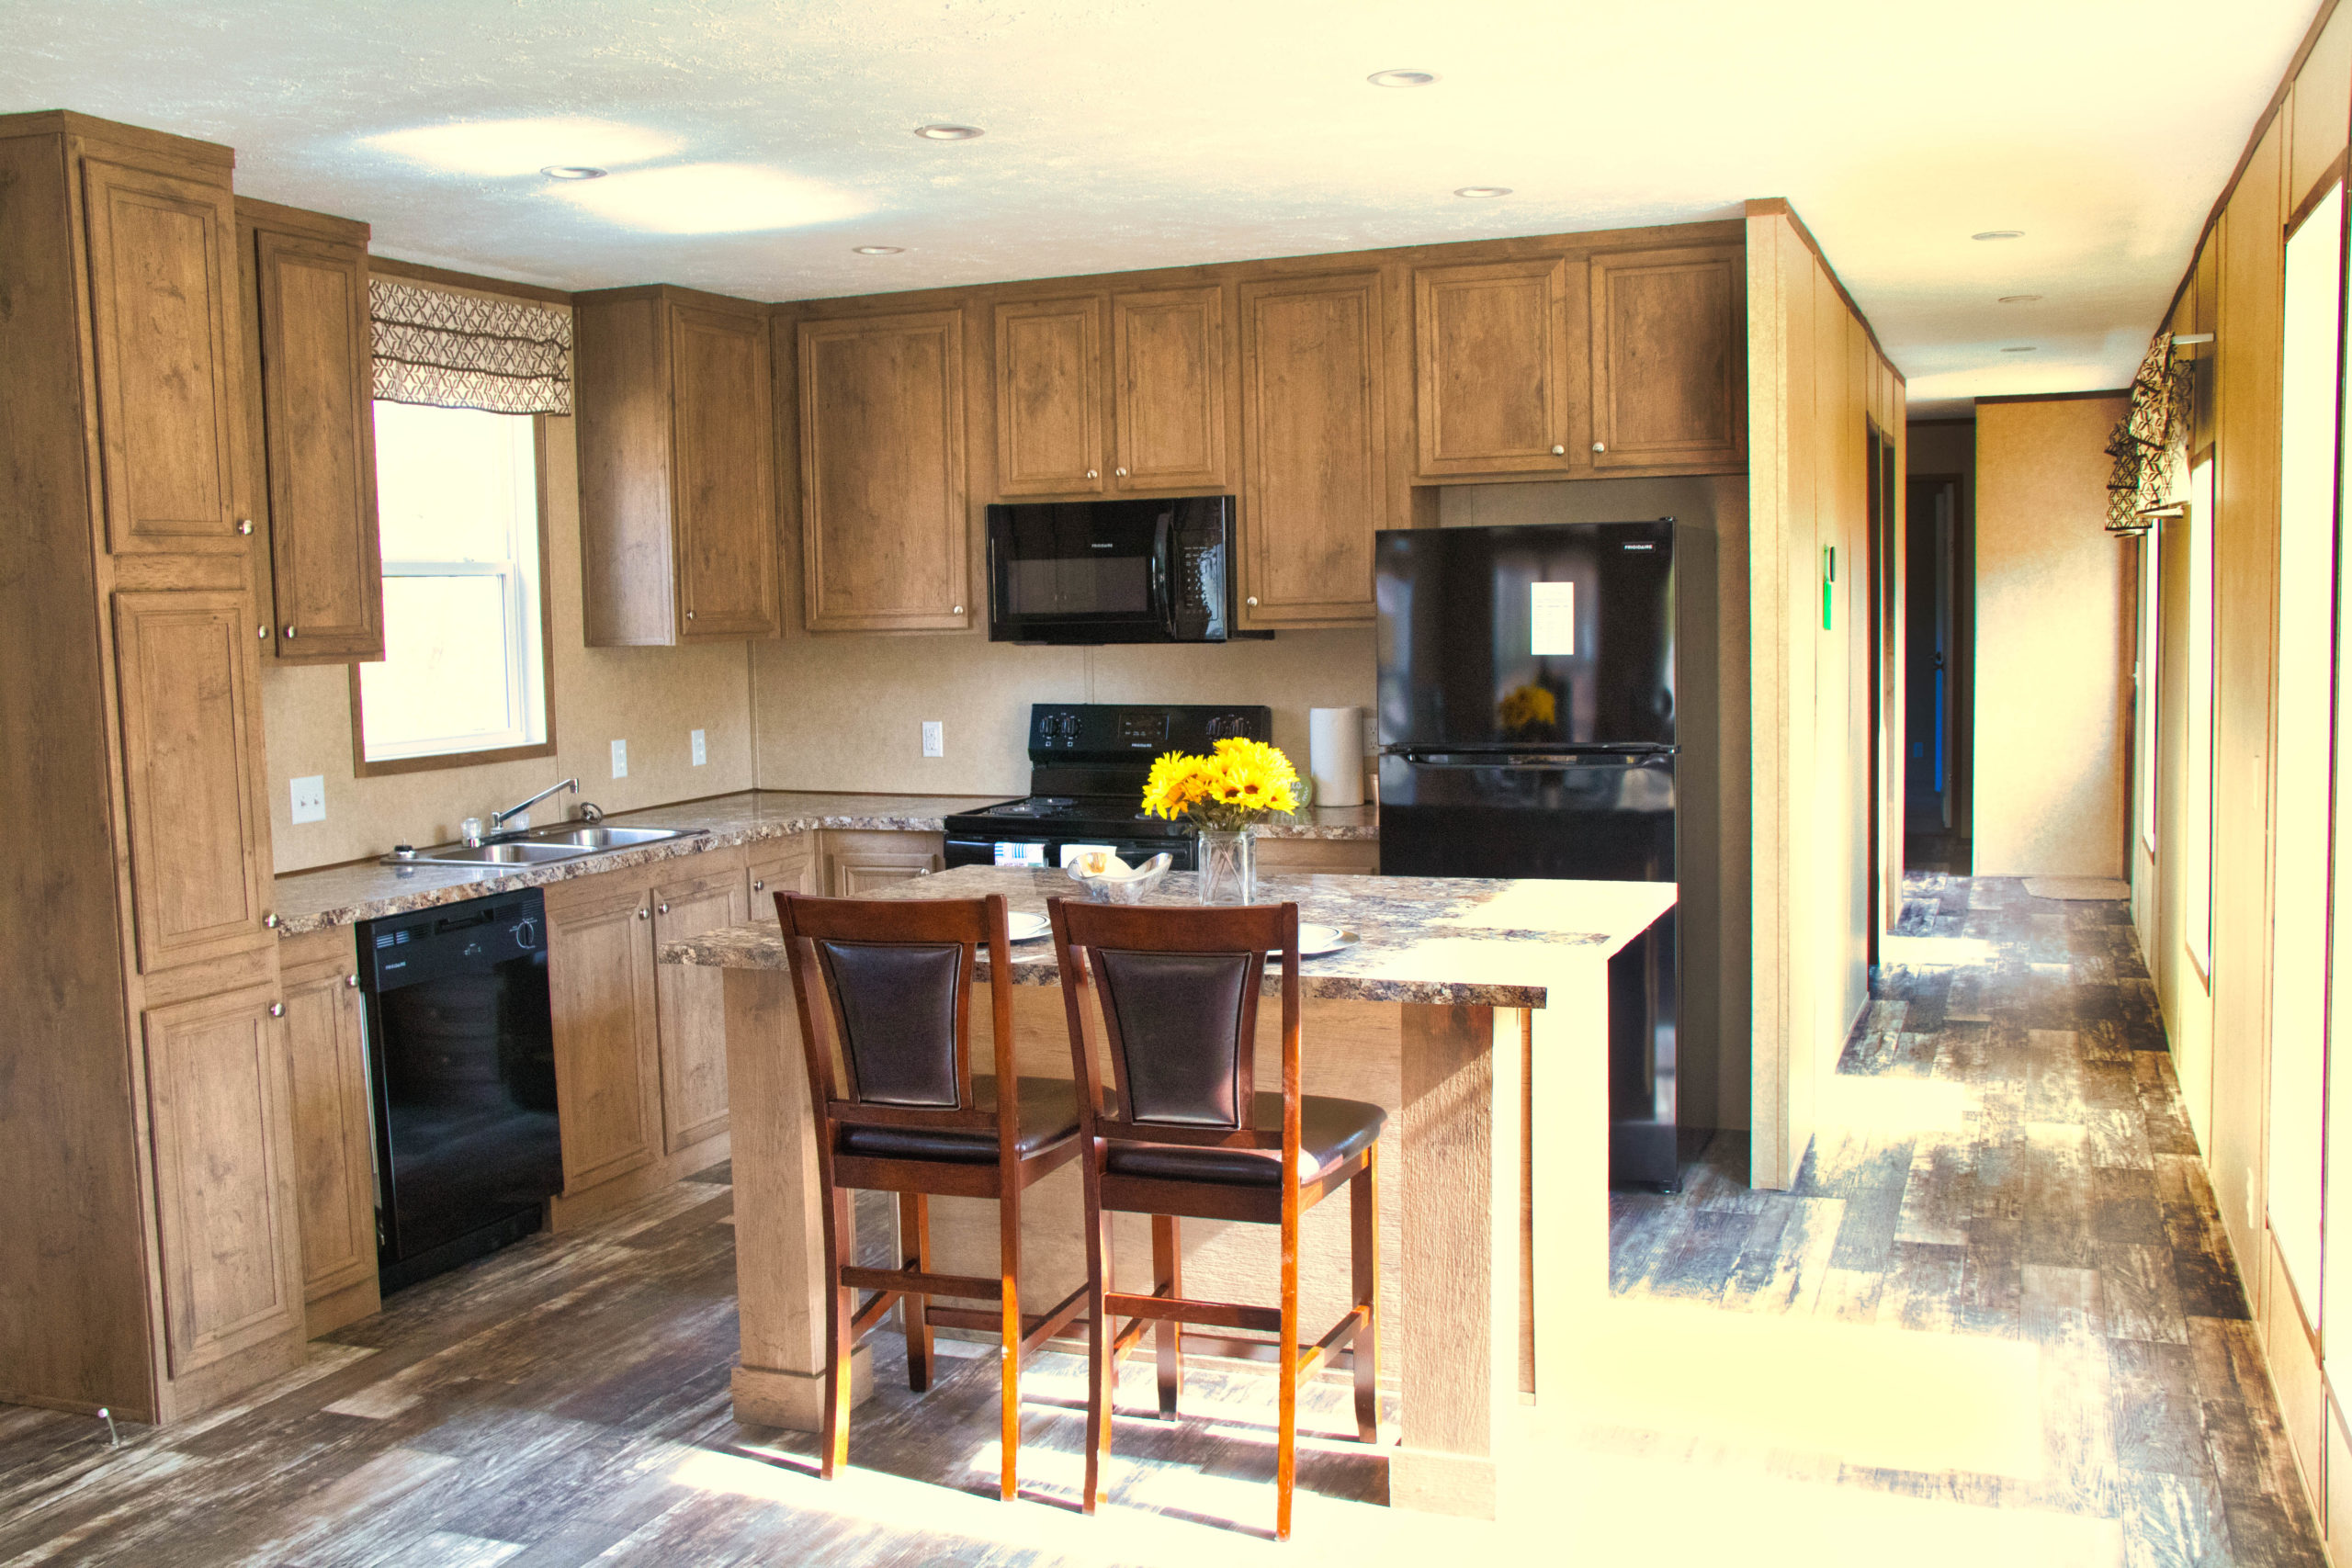 Northwoods Park Kitchen Area Edit scaled - North Woods Park announces Branson’s first age-restricted modular home park